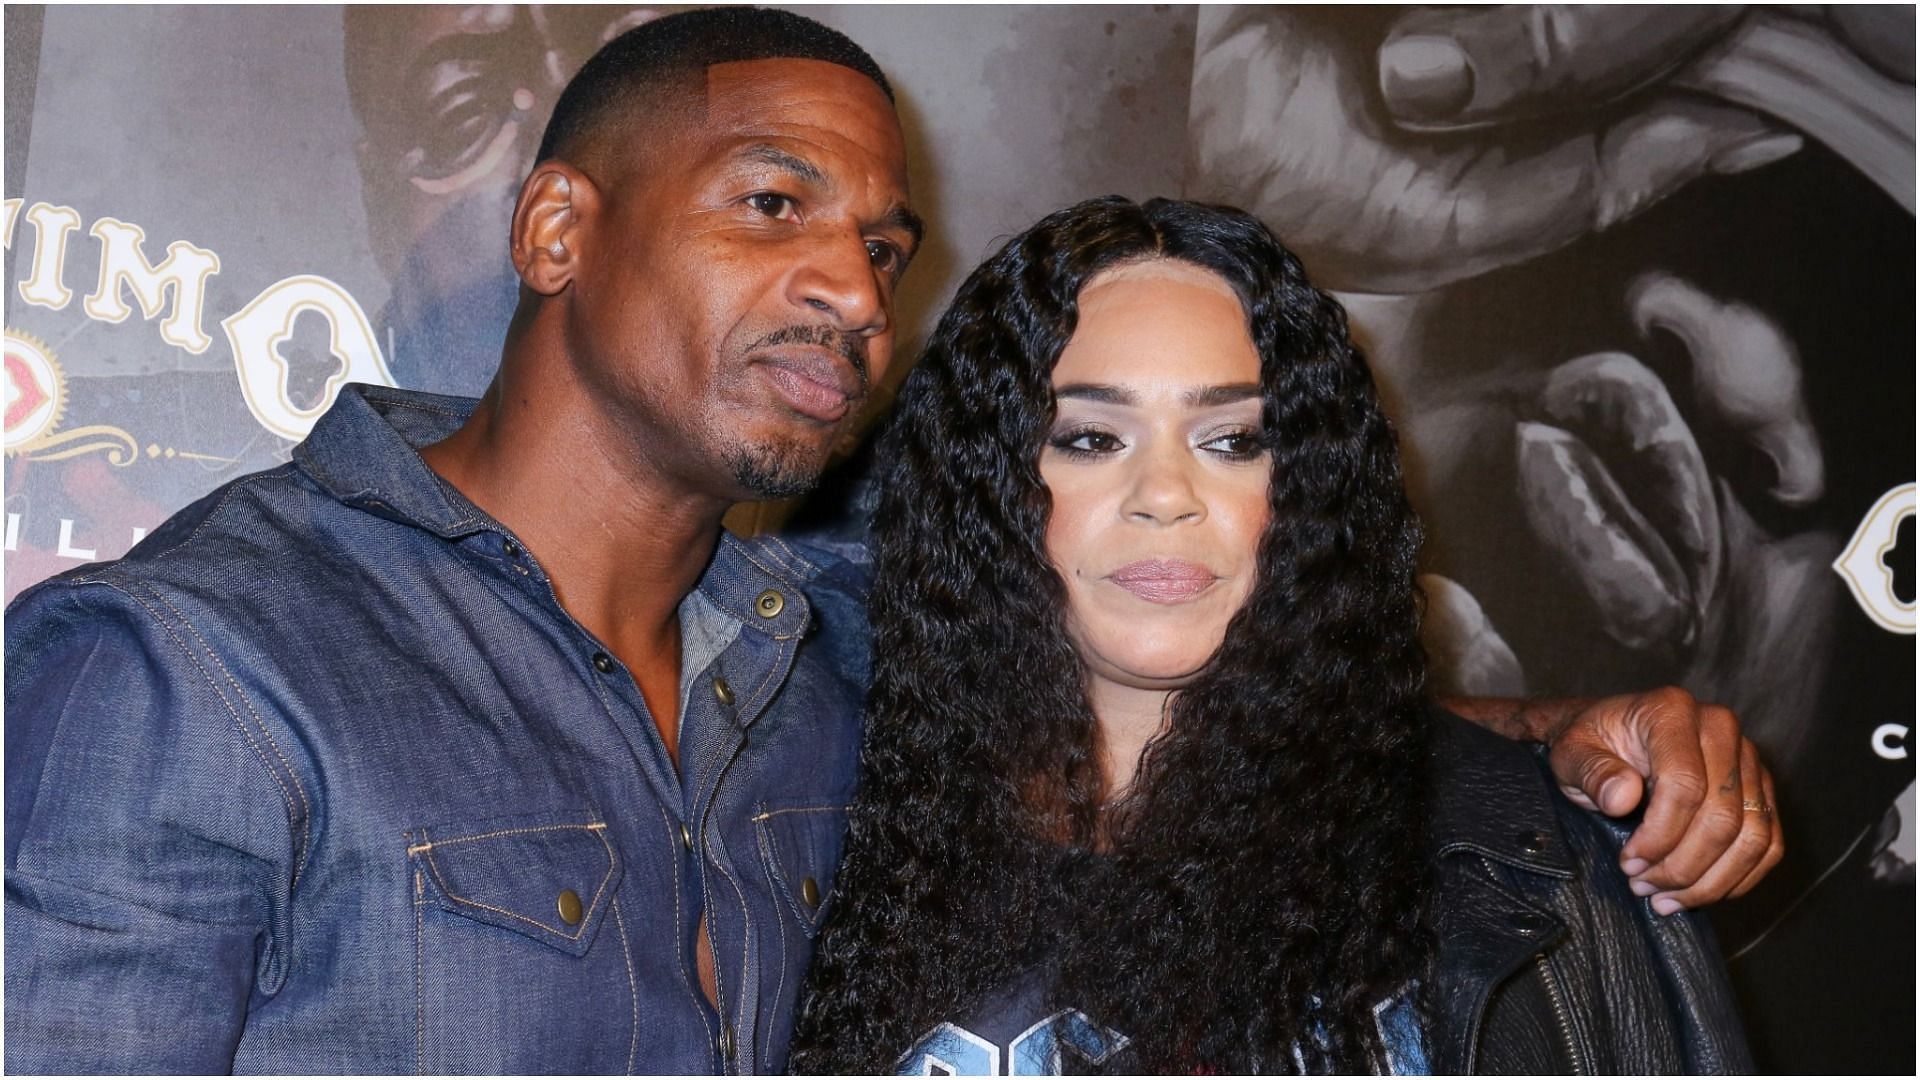 Stevie J has demanded spousal support from Faith Evans (Image by Arturo Holmes via Getty Images)